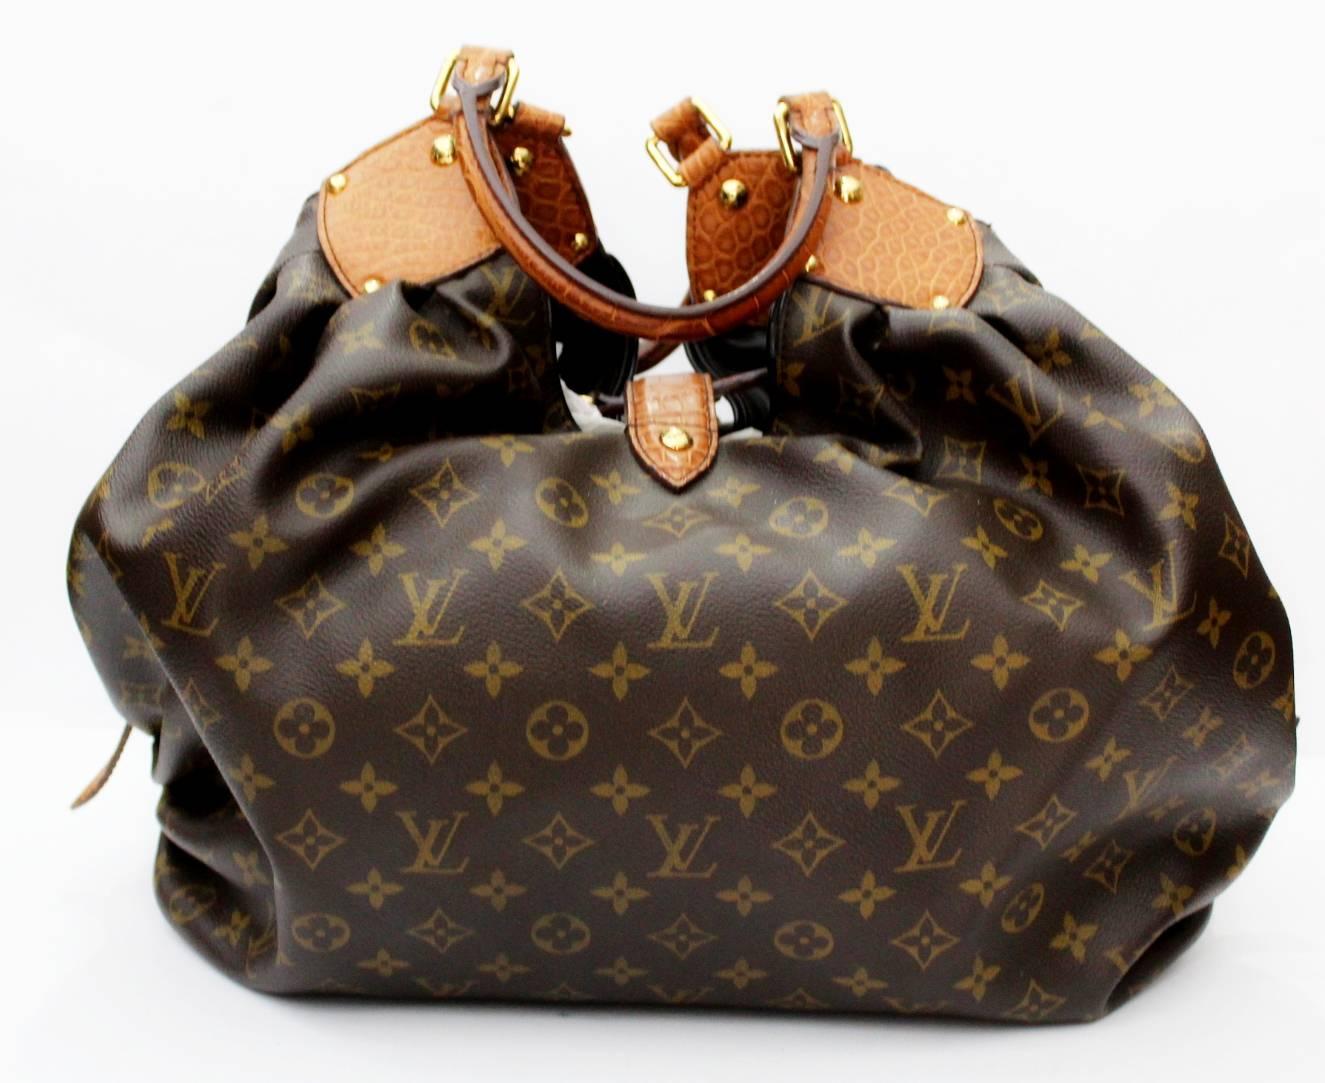 A work of art by the house of LV, this rare and hard to find Louis Vuitton Limited Edition Alligator Trim Monogram Canvas XL Bag is a true collectors item. Soft and pliable Monogram canvas is outlined with beautiful exotic Alligator trim. A matching